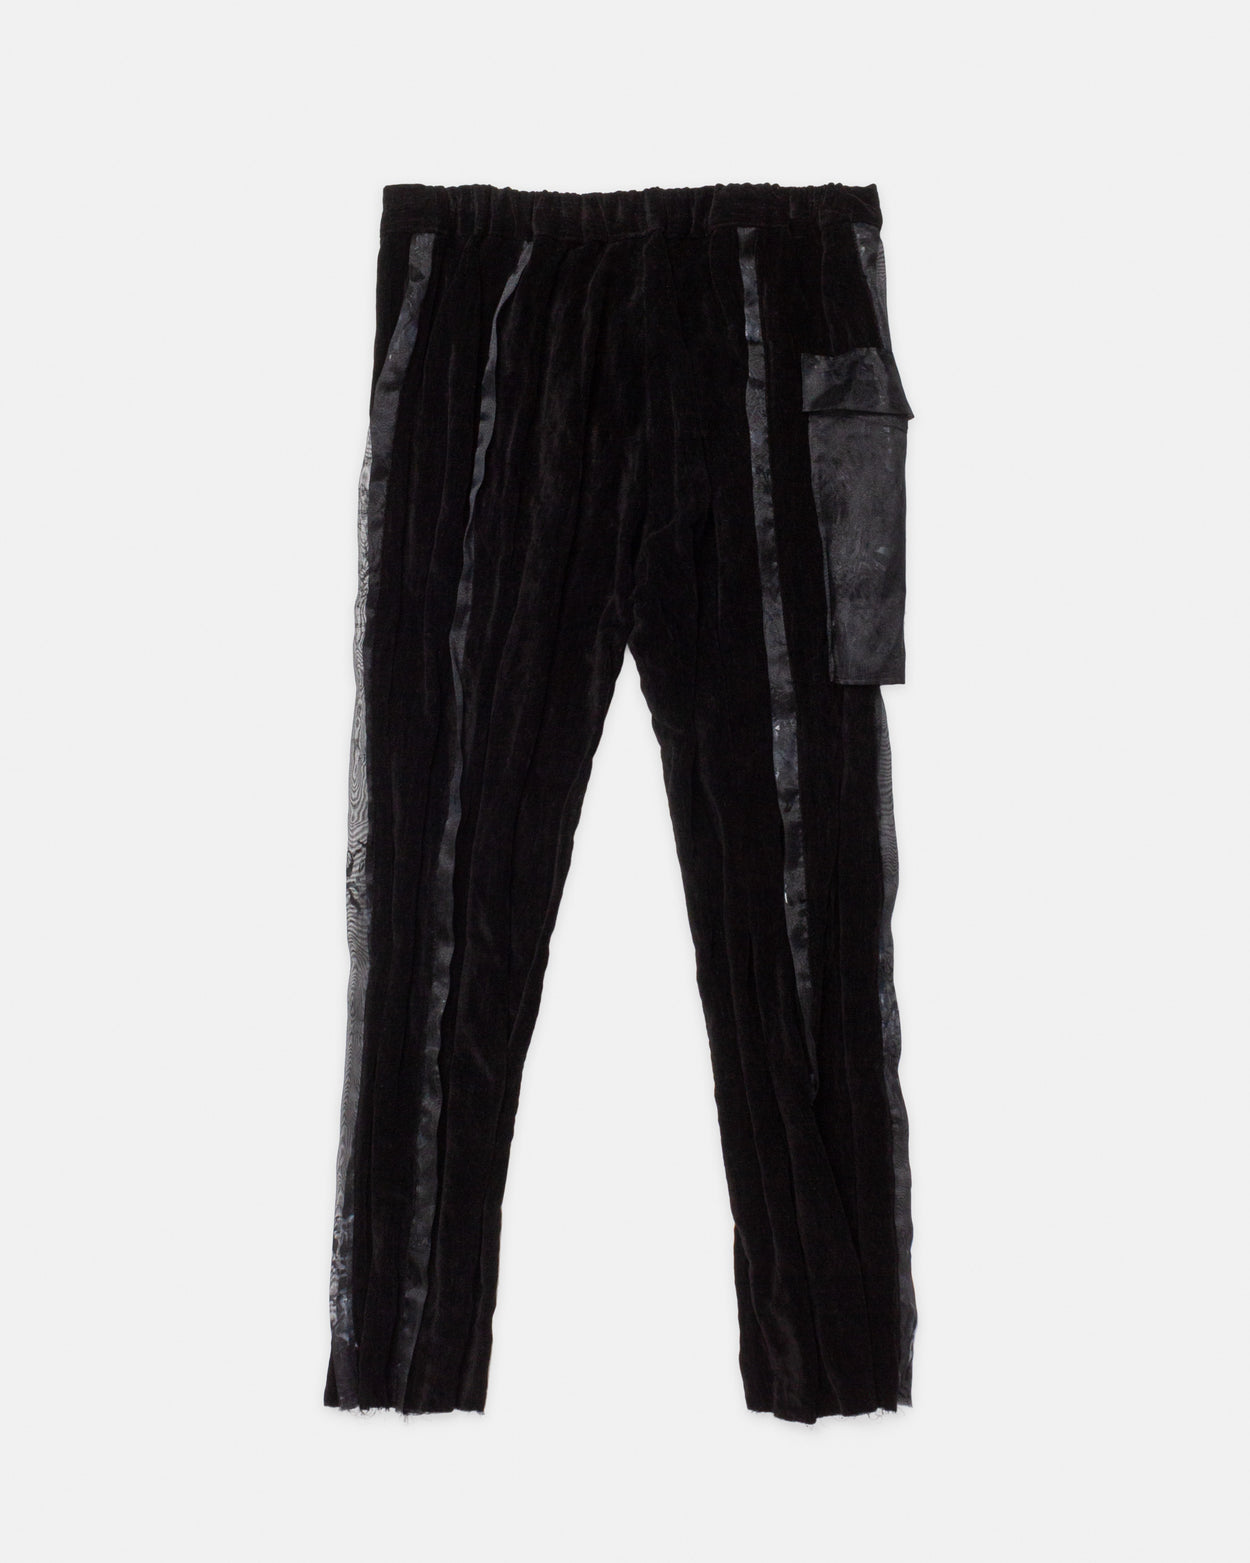 The Ash Trousers